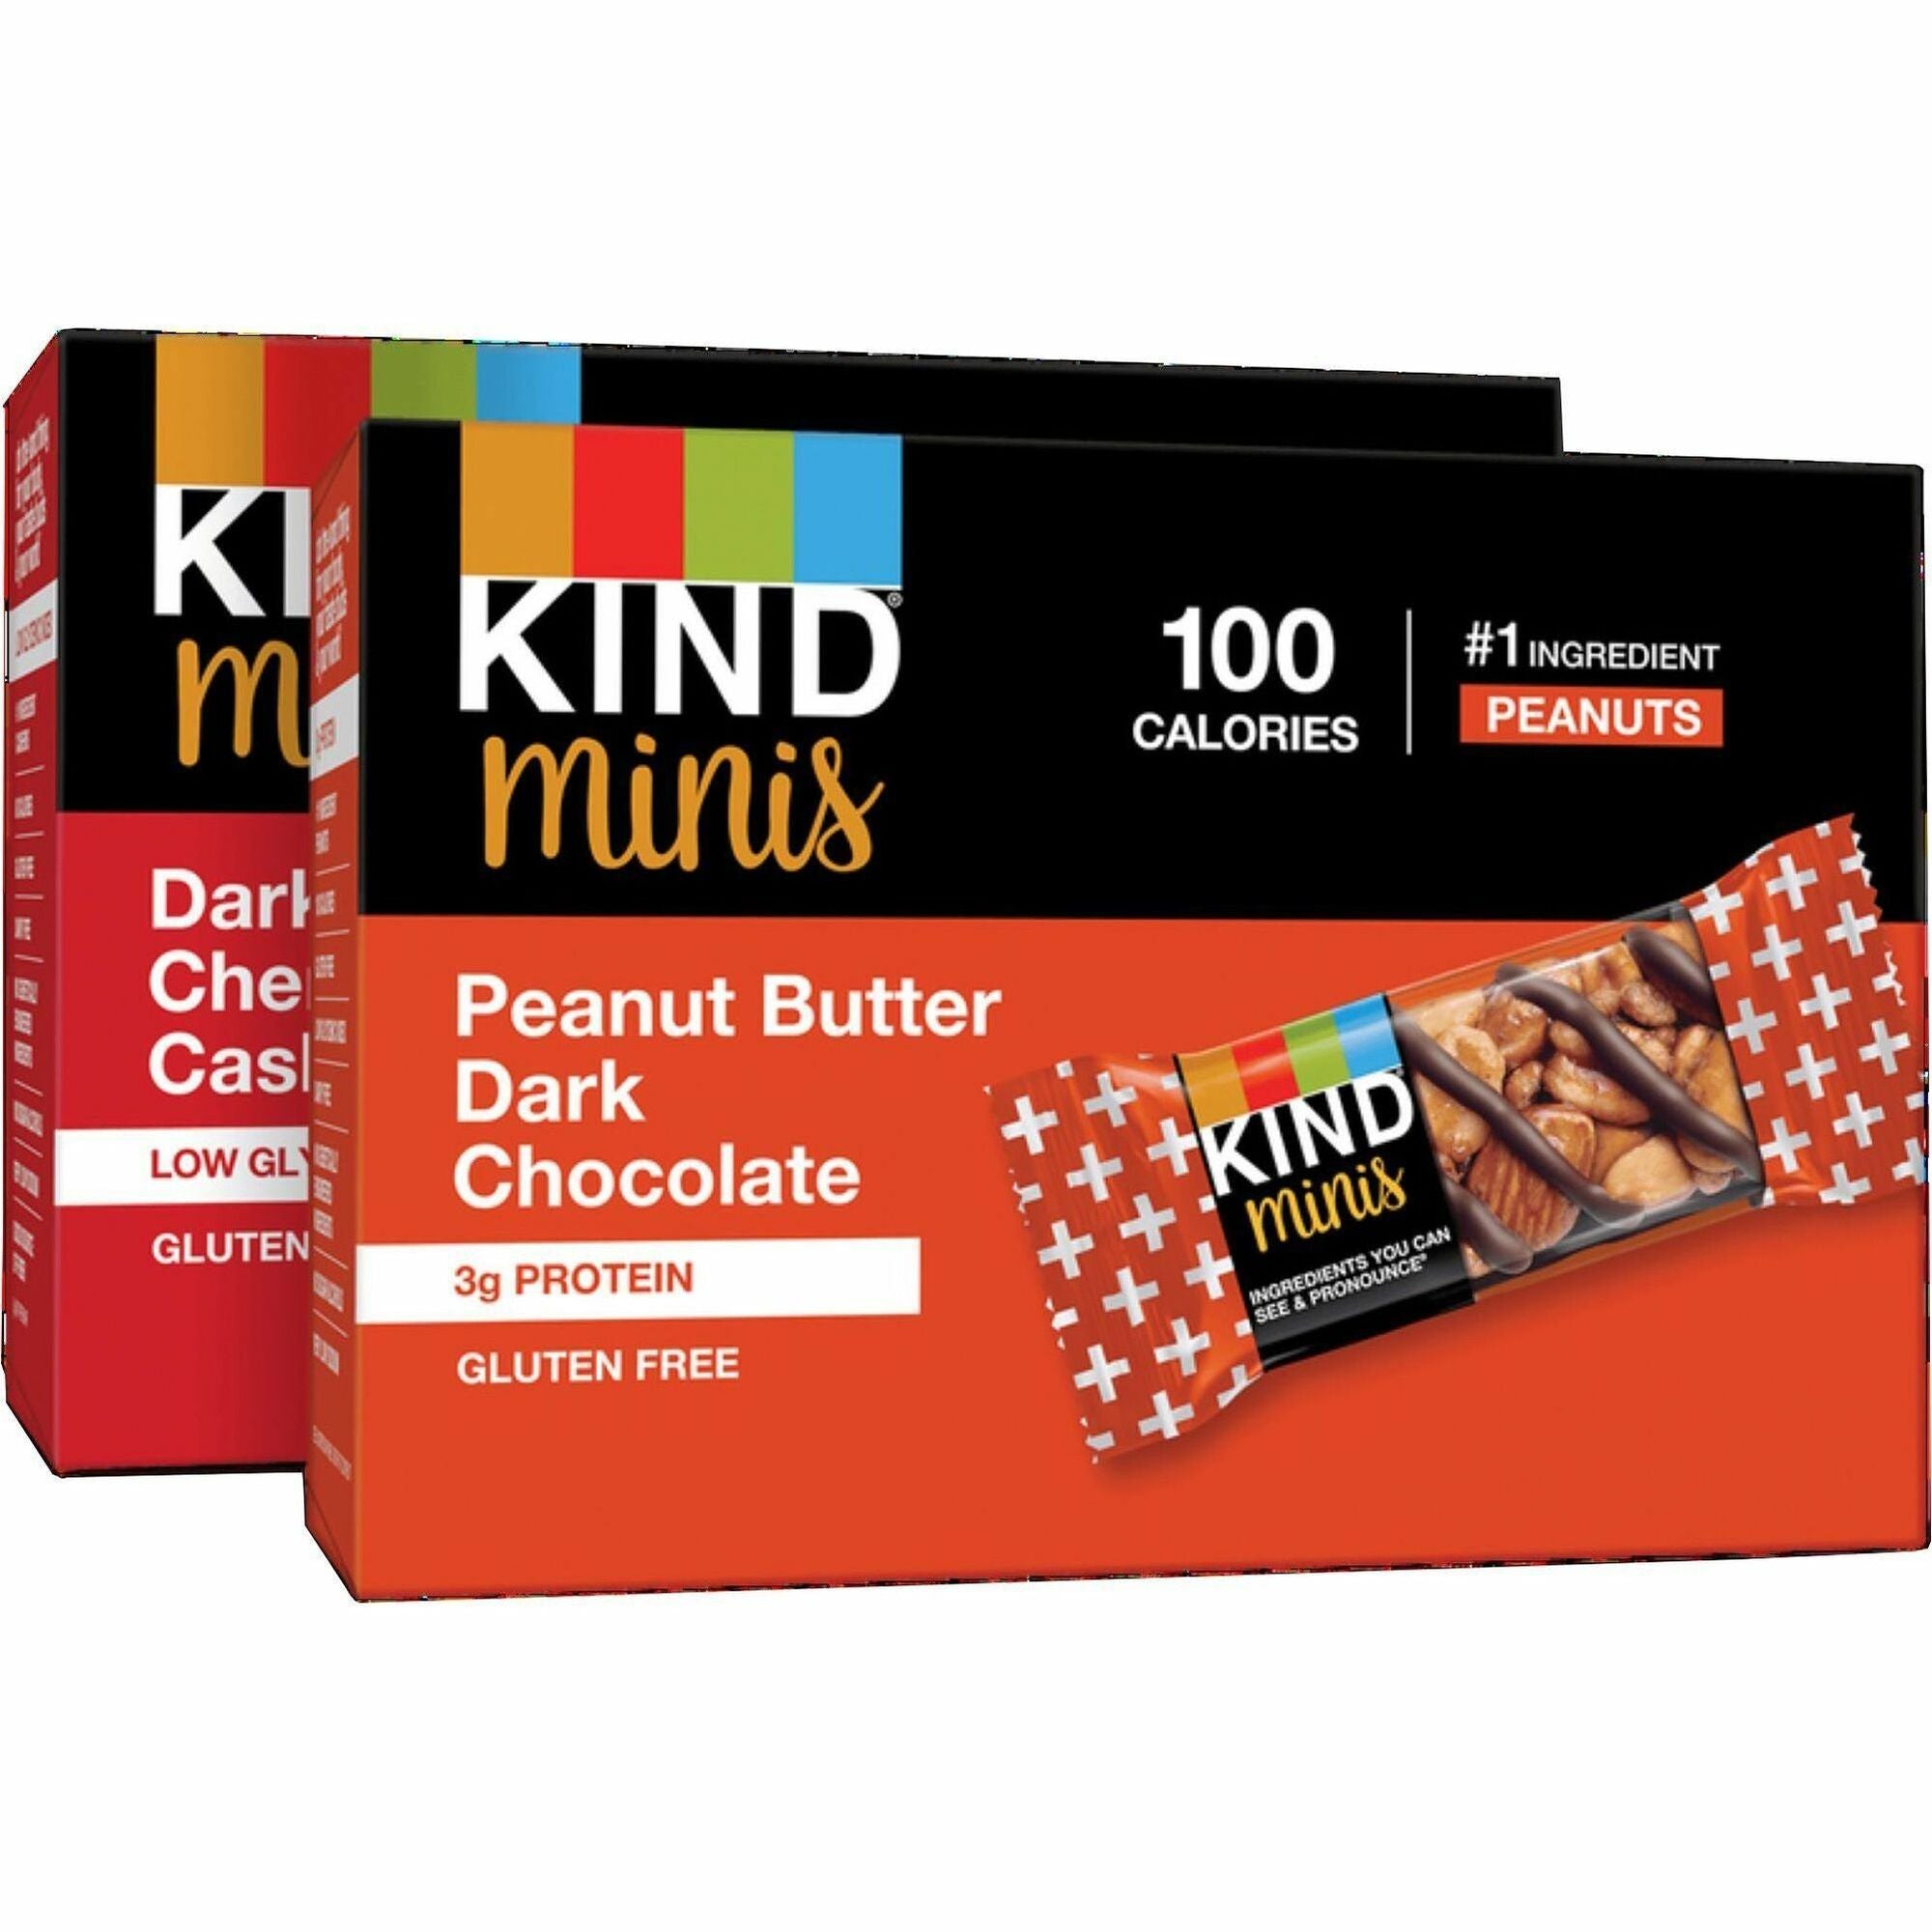 kind-minis-snack-bar-variety-pack-trans-fat-free-no-artificial-sweeteners-gluten-free-low-sodium-low-glycemic-peanut-butter-dark-chocolate-dark-chocolate-cherry-cashew-071-oz-20-box_knd43012 - 1